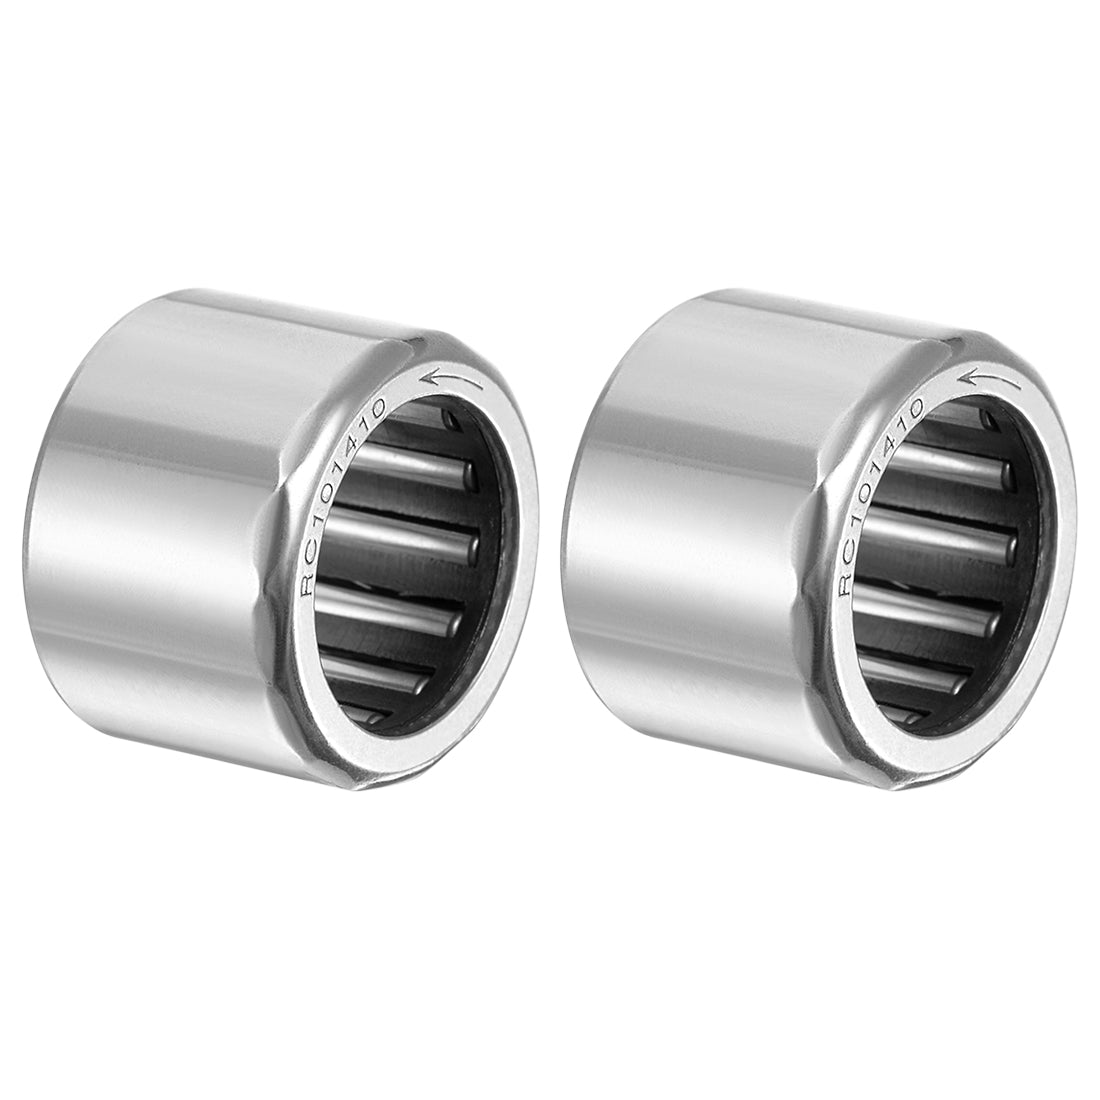 uxcell Uxcell RC101410 Needle Roller Bearings, One Way Bearing, 5/8" Bore 7/8" OD 5/8" Width 2pcs